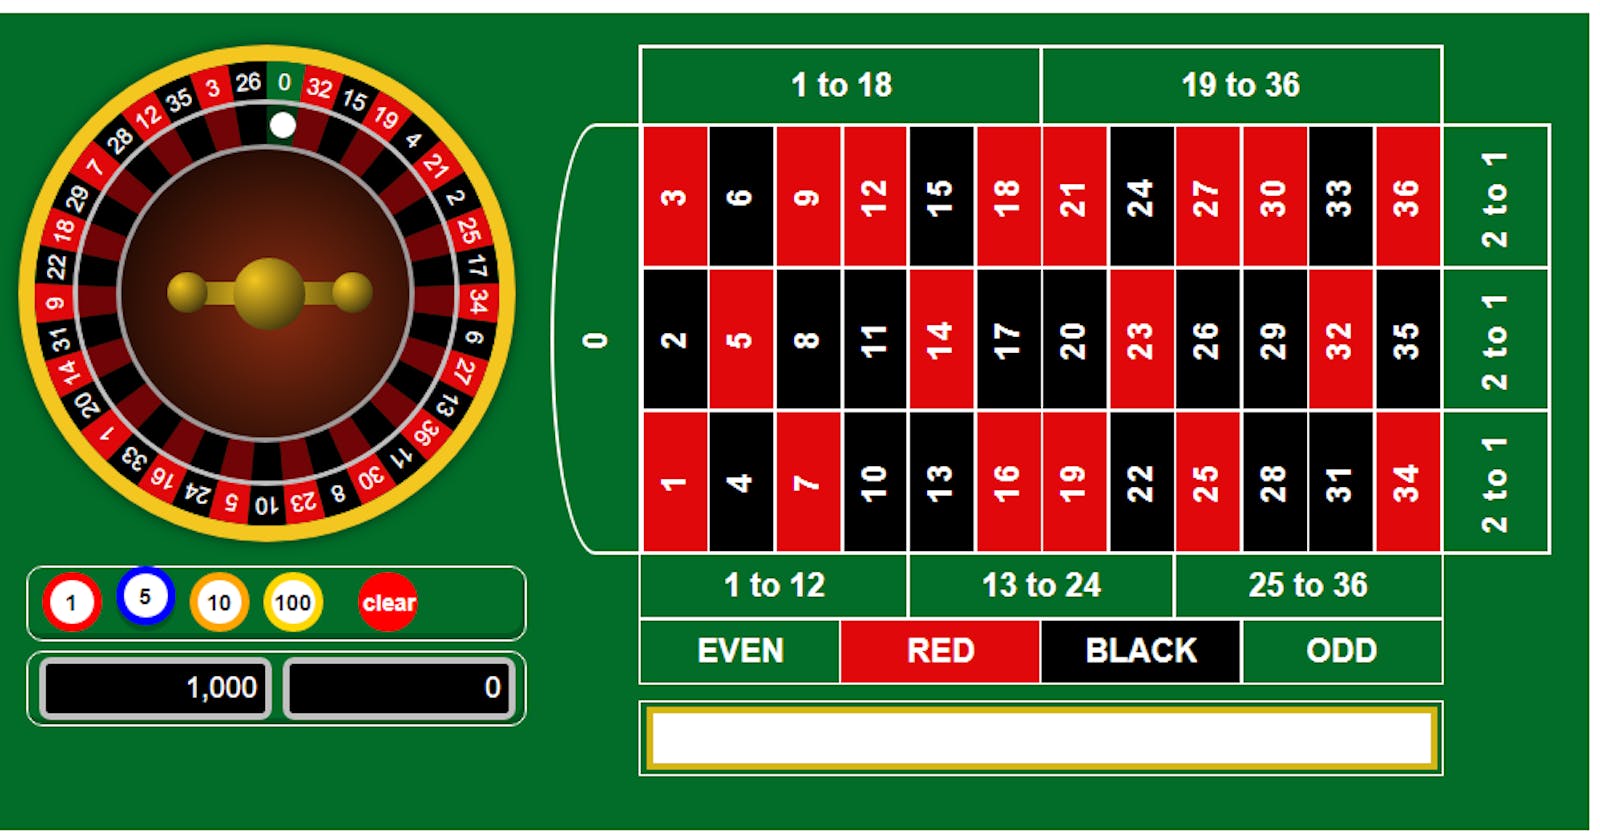 One way to make Roulette using Javascript - Part 2